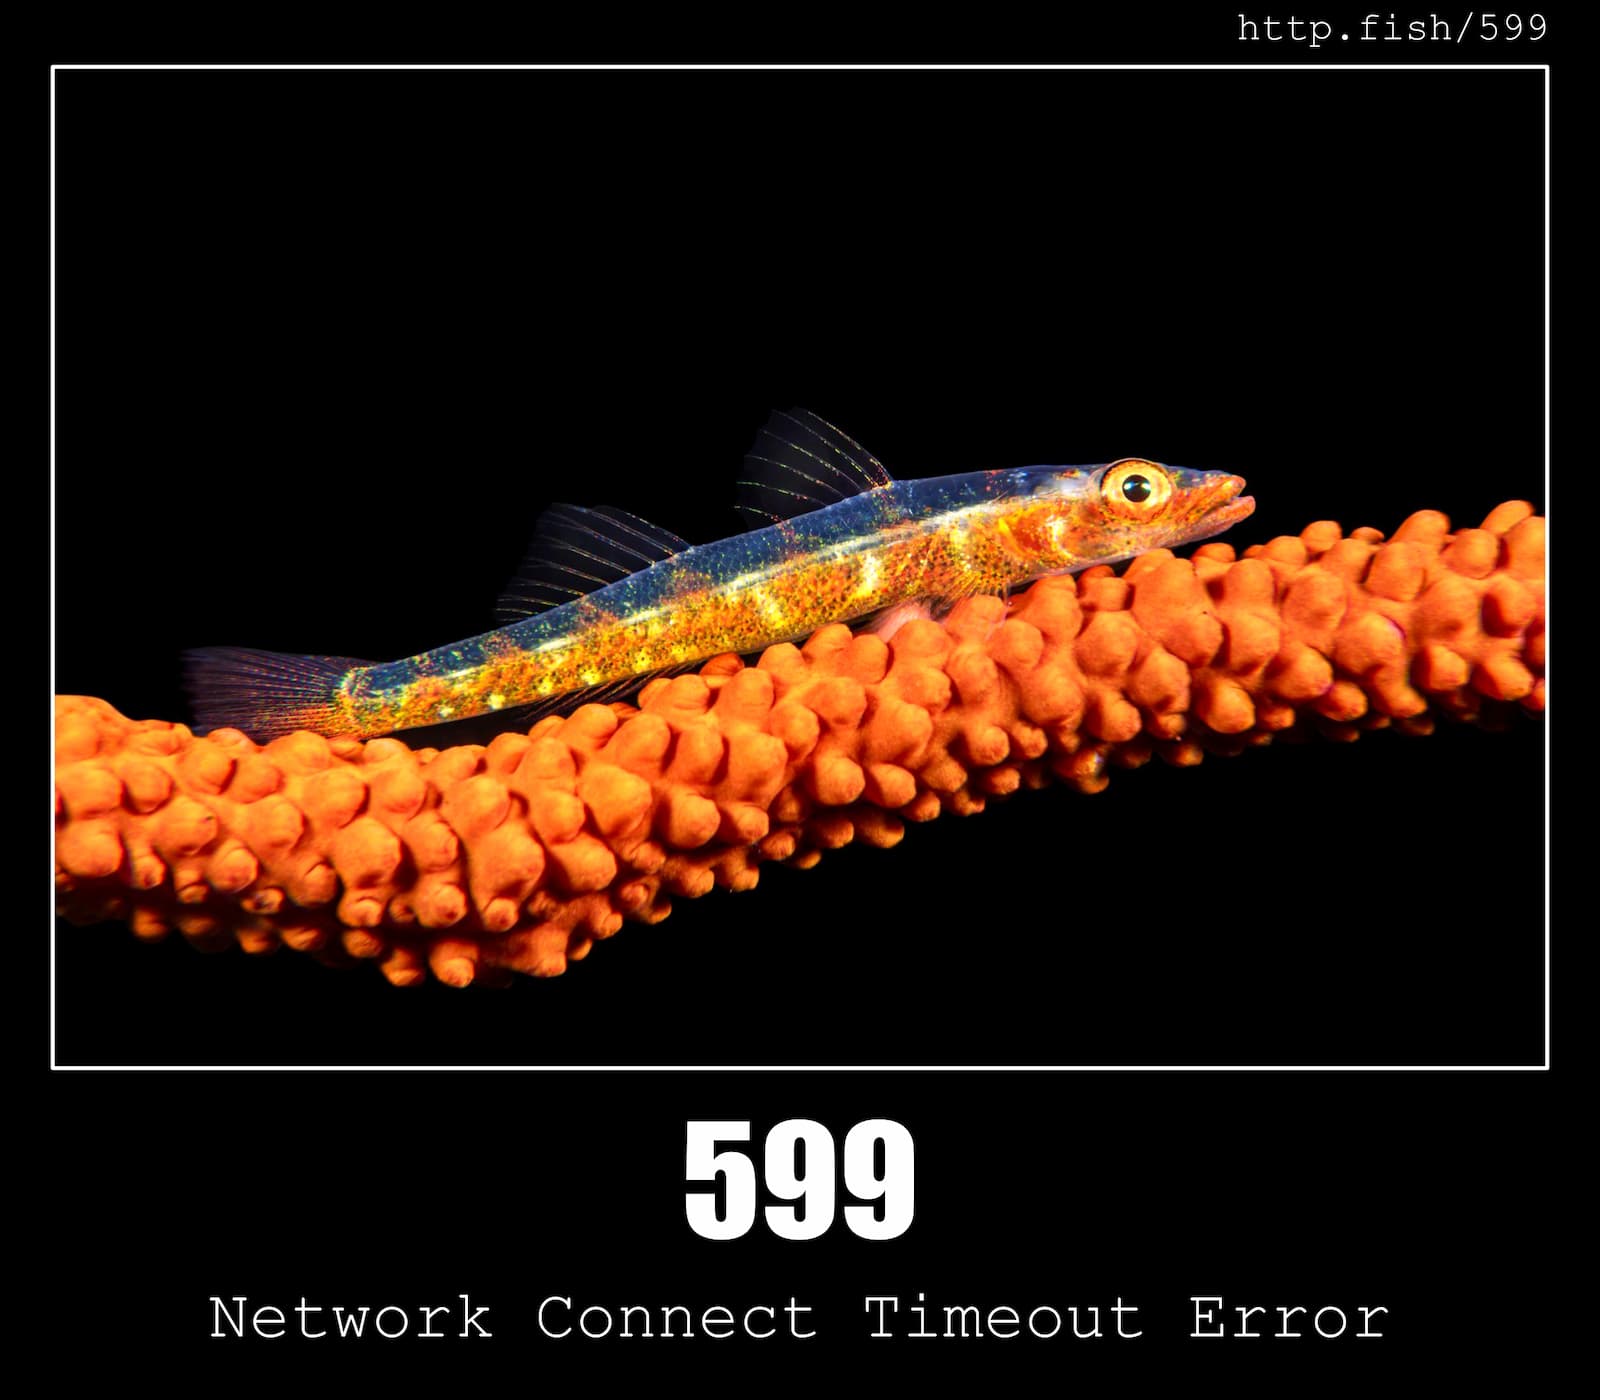 HTTP Status Code 599 Network Connect Timeout Error & Fish